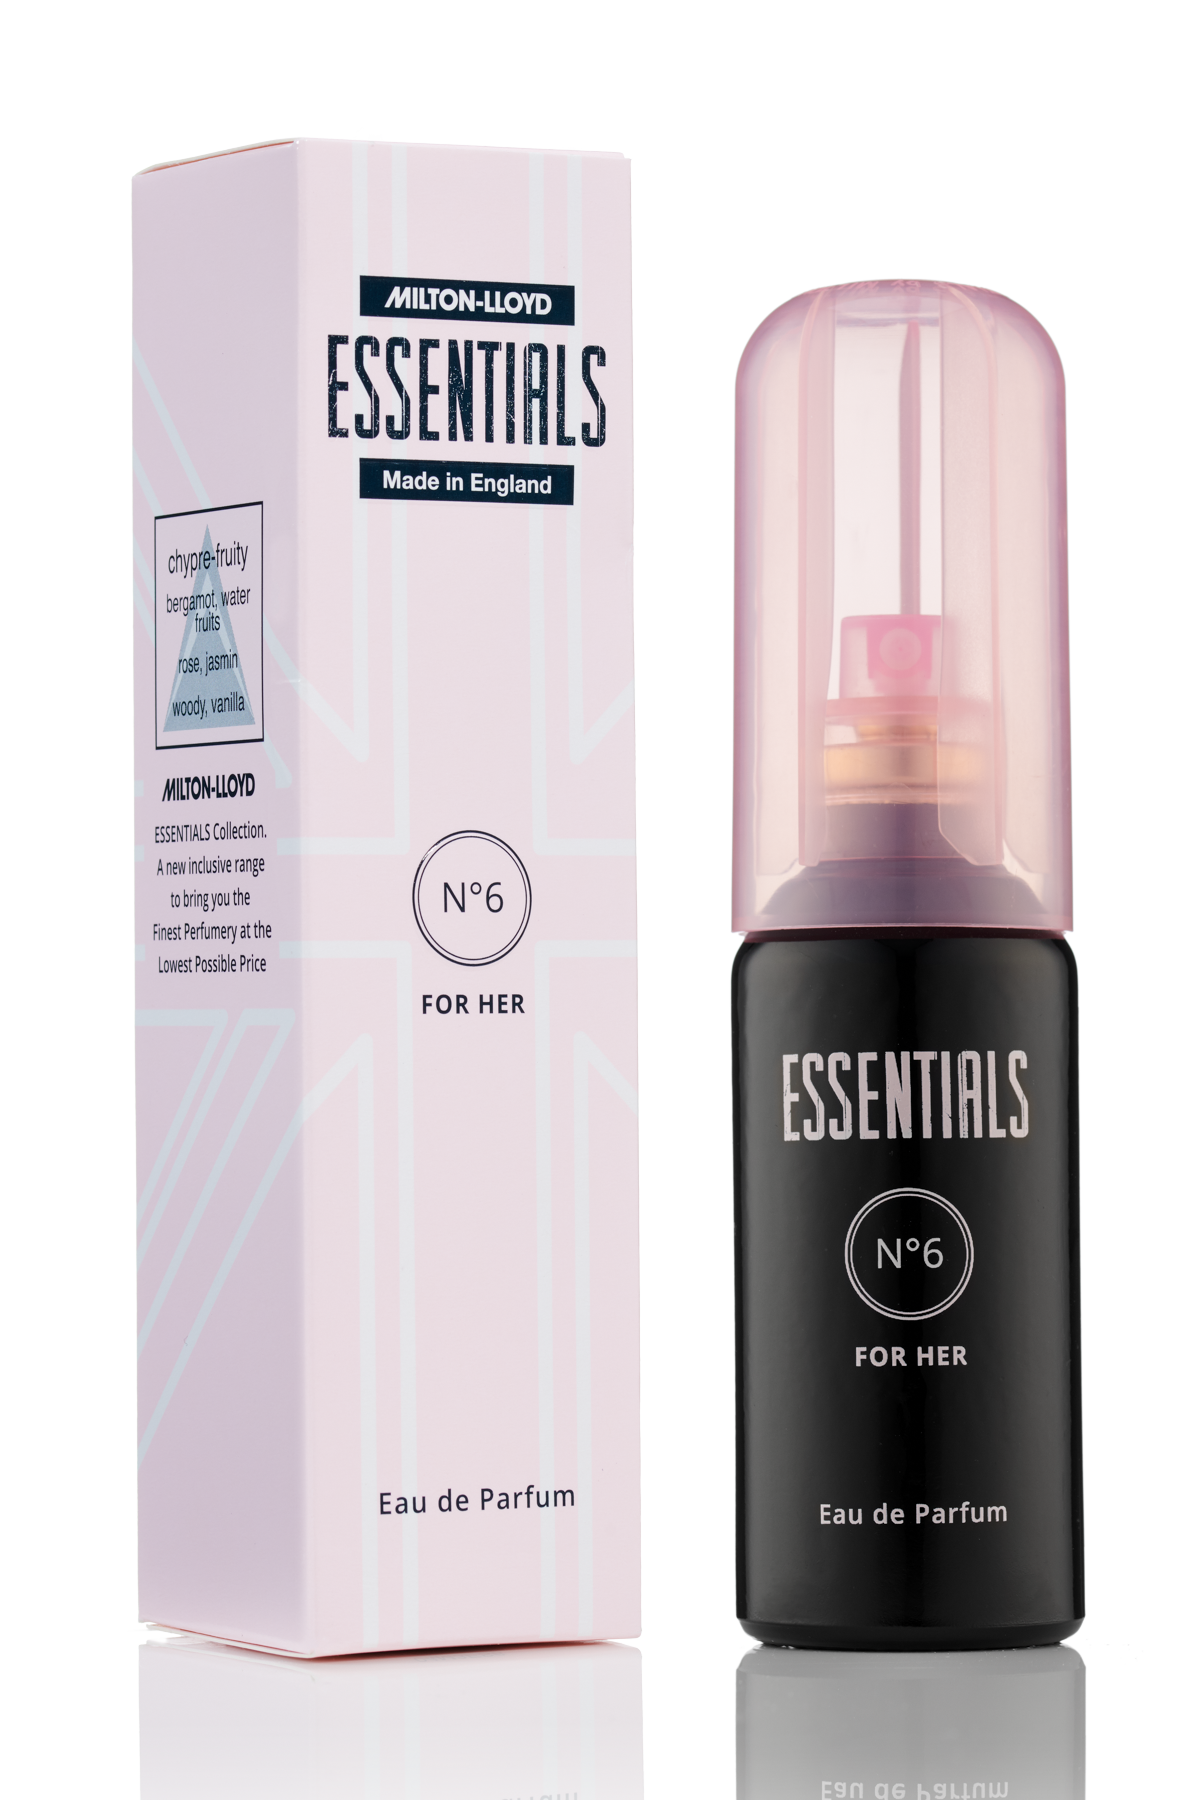 MILTON-LLOYD ESSENTIALS NO.6 FOR HER EDP 50ML - EASTERN SCENT